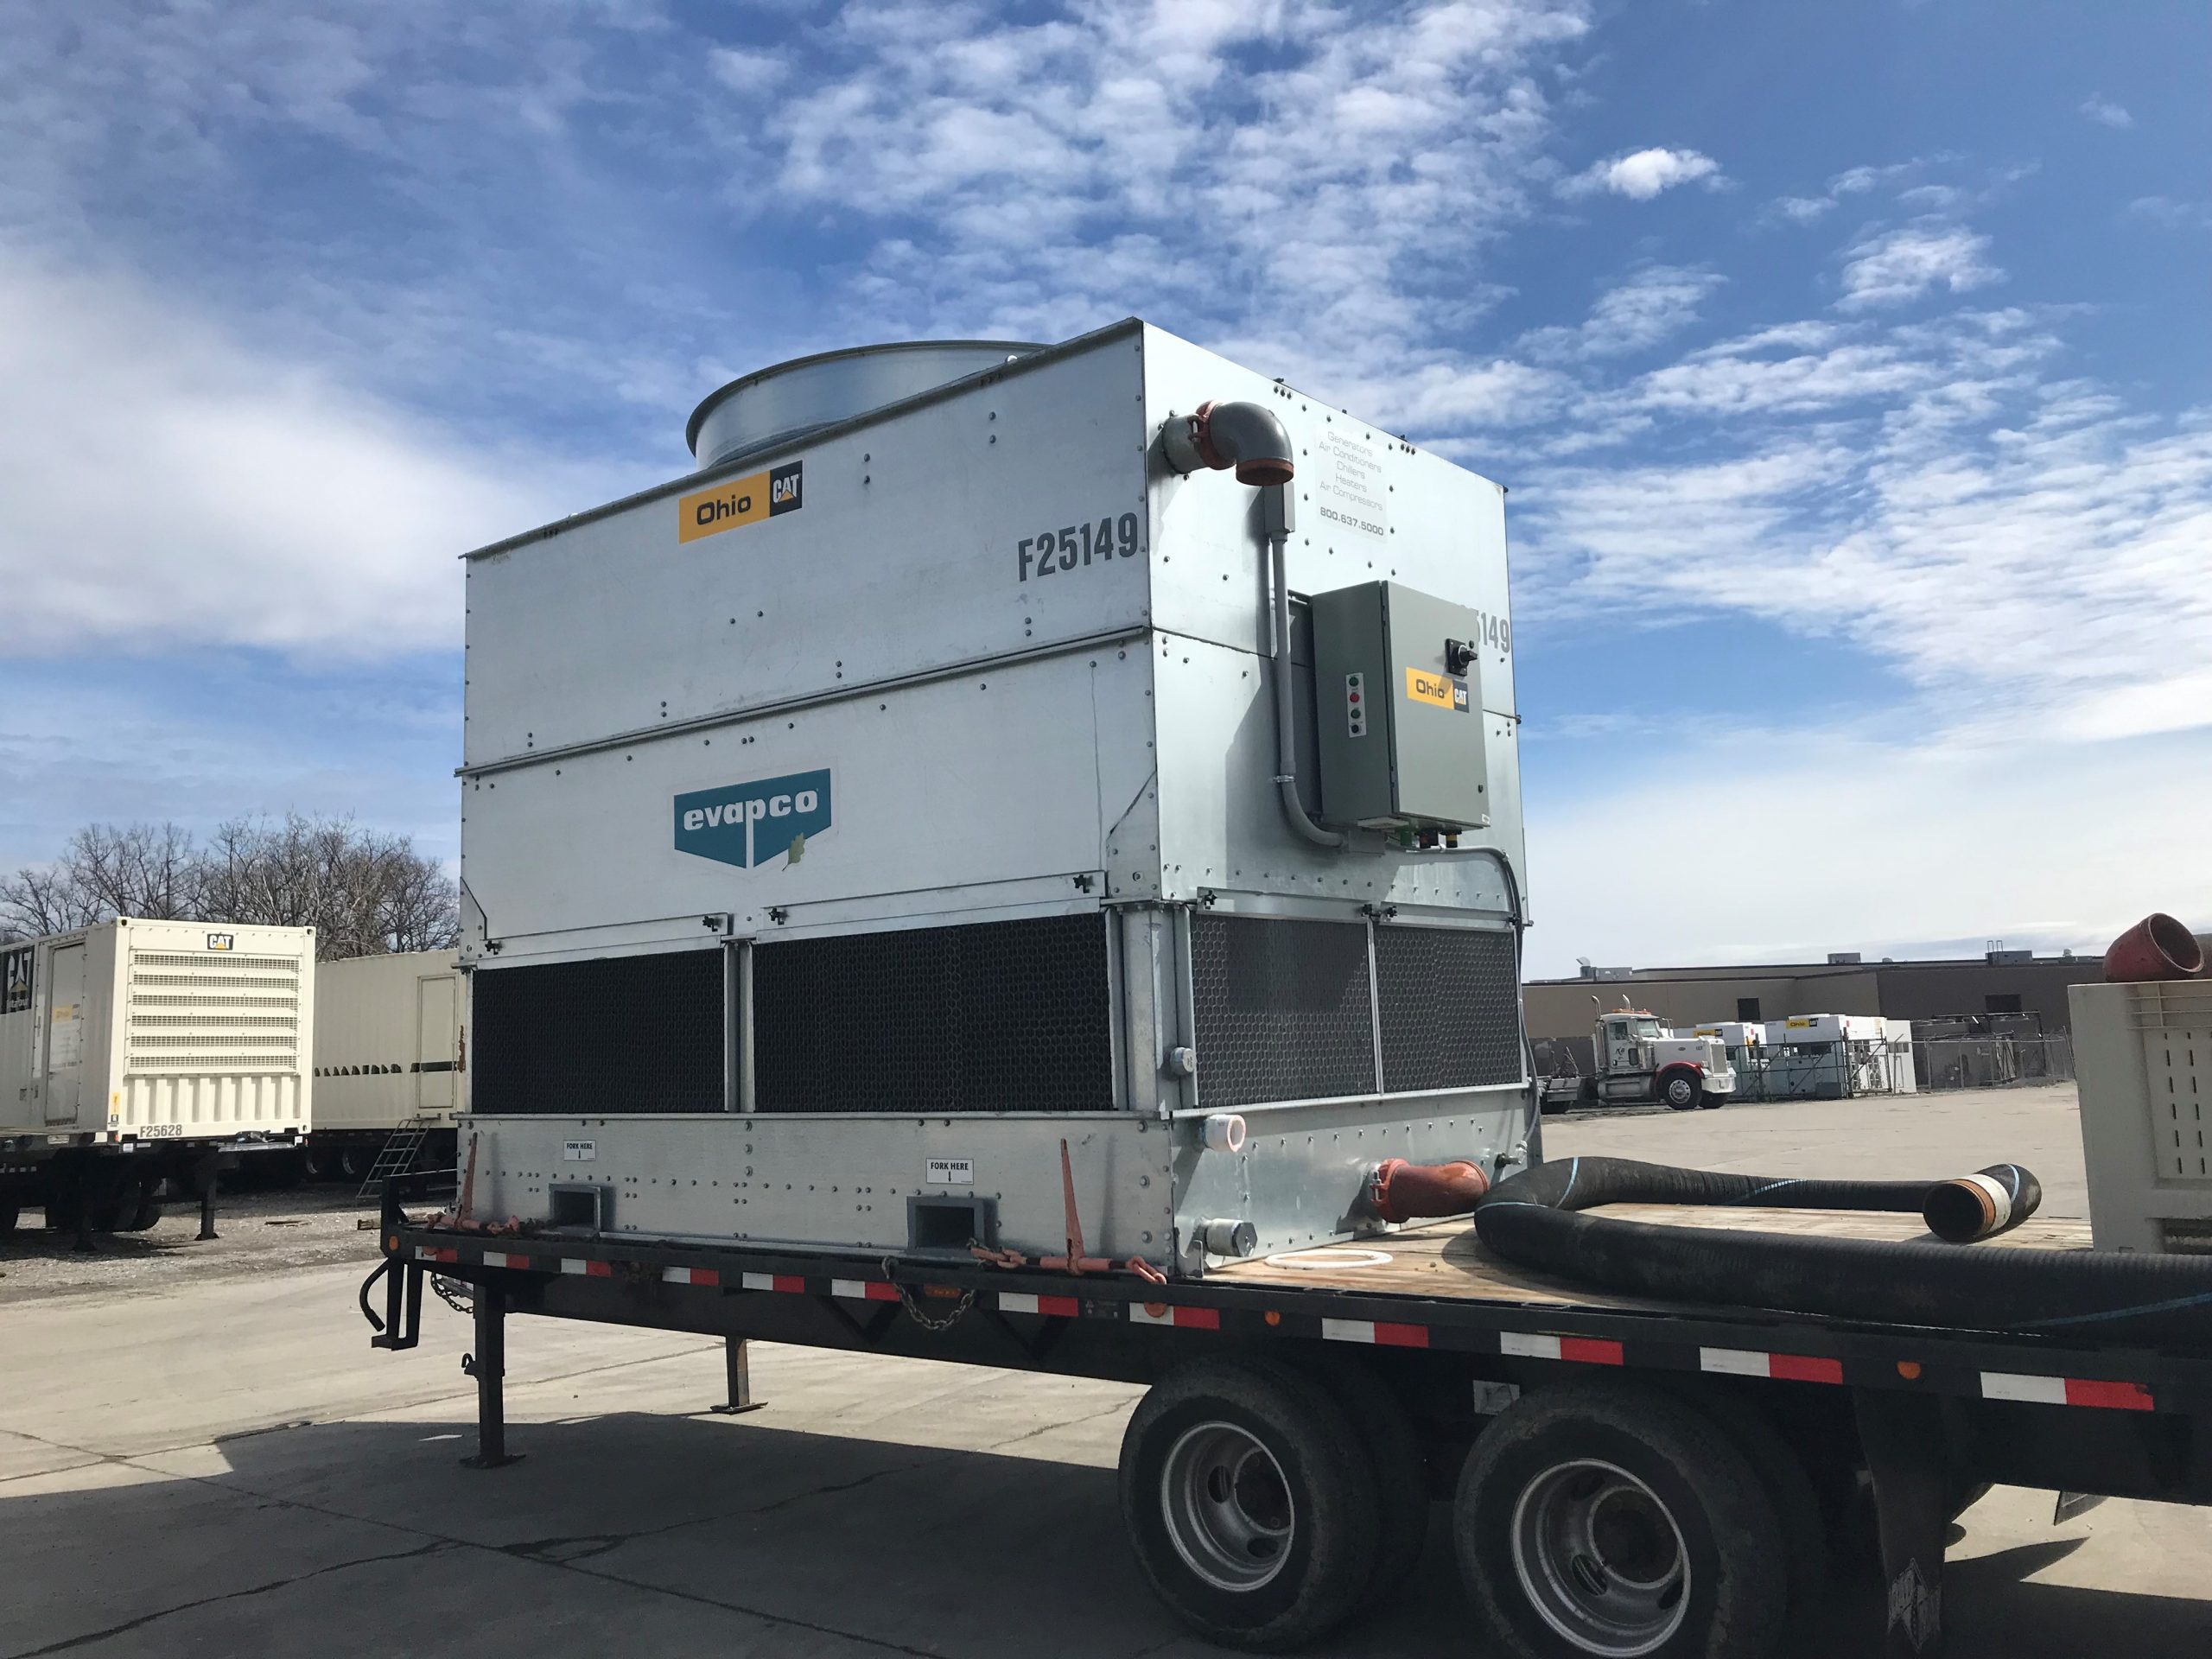 COOLING TOWER RENTALS WORLDWIDE - Ohio CAT